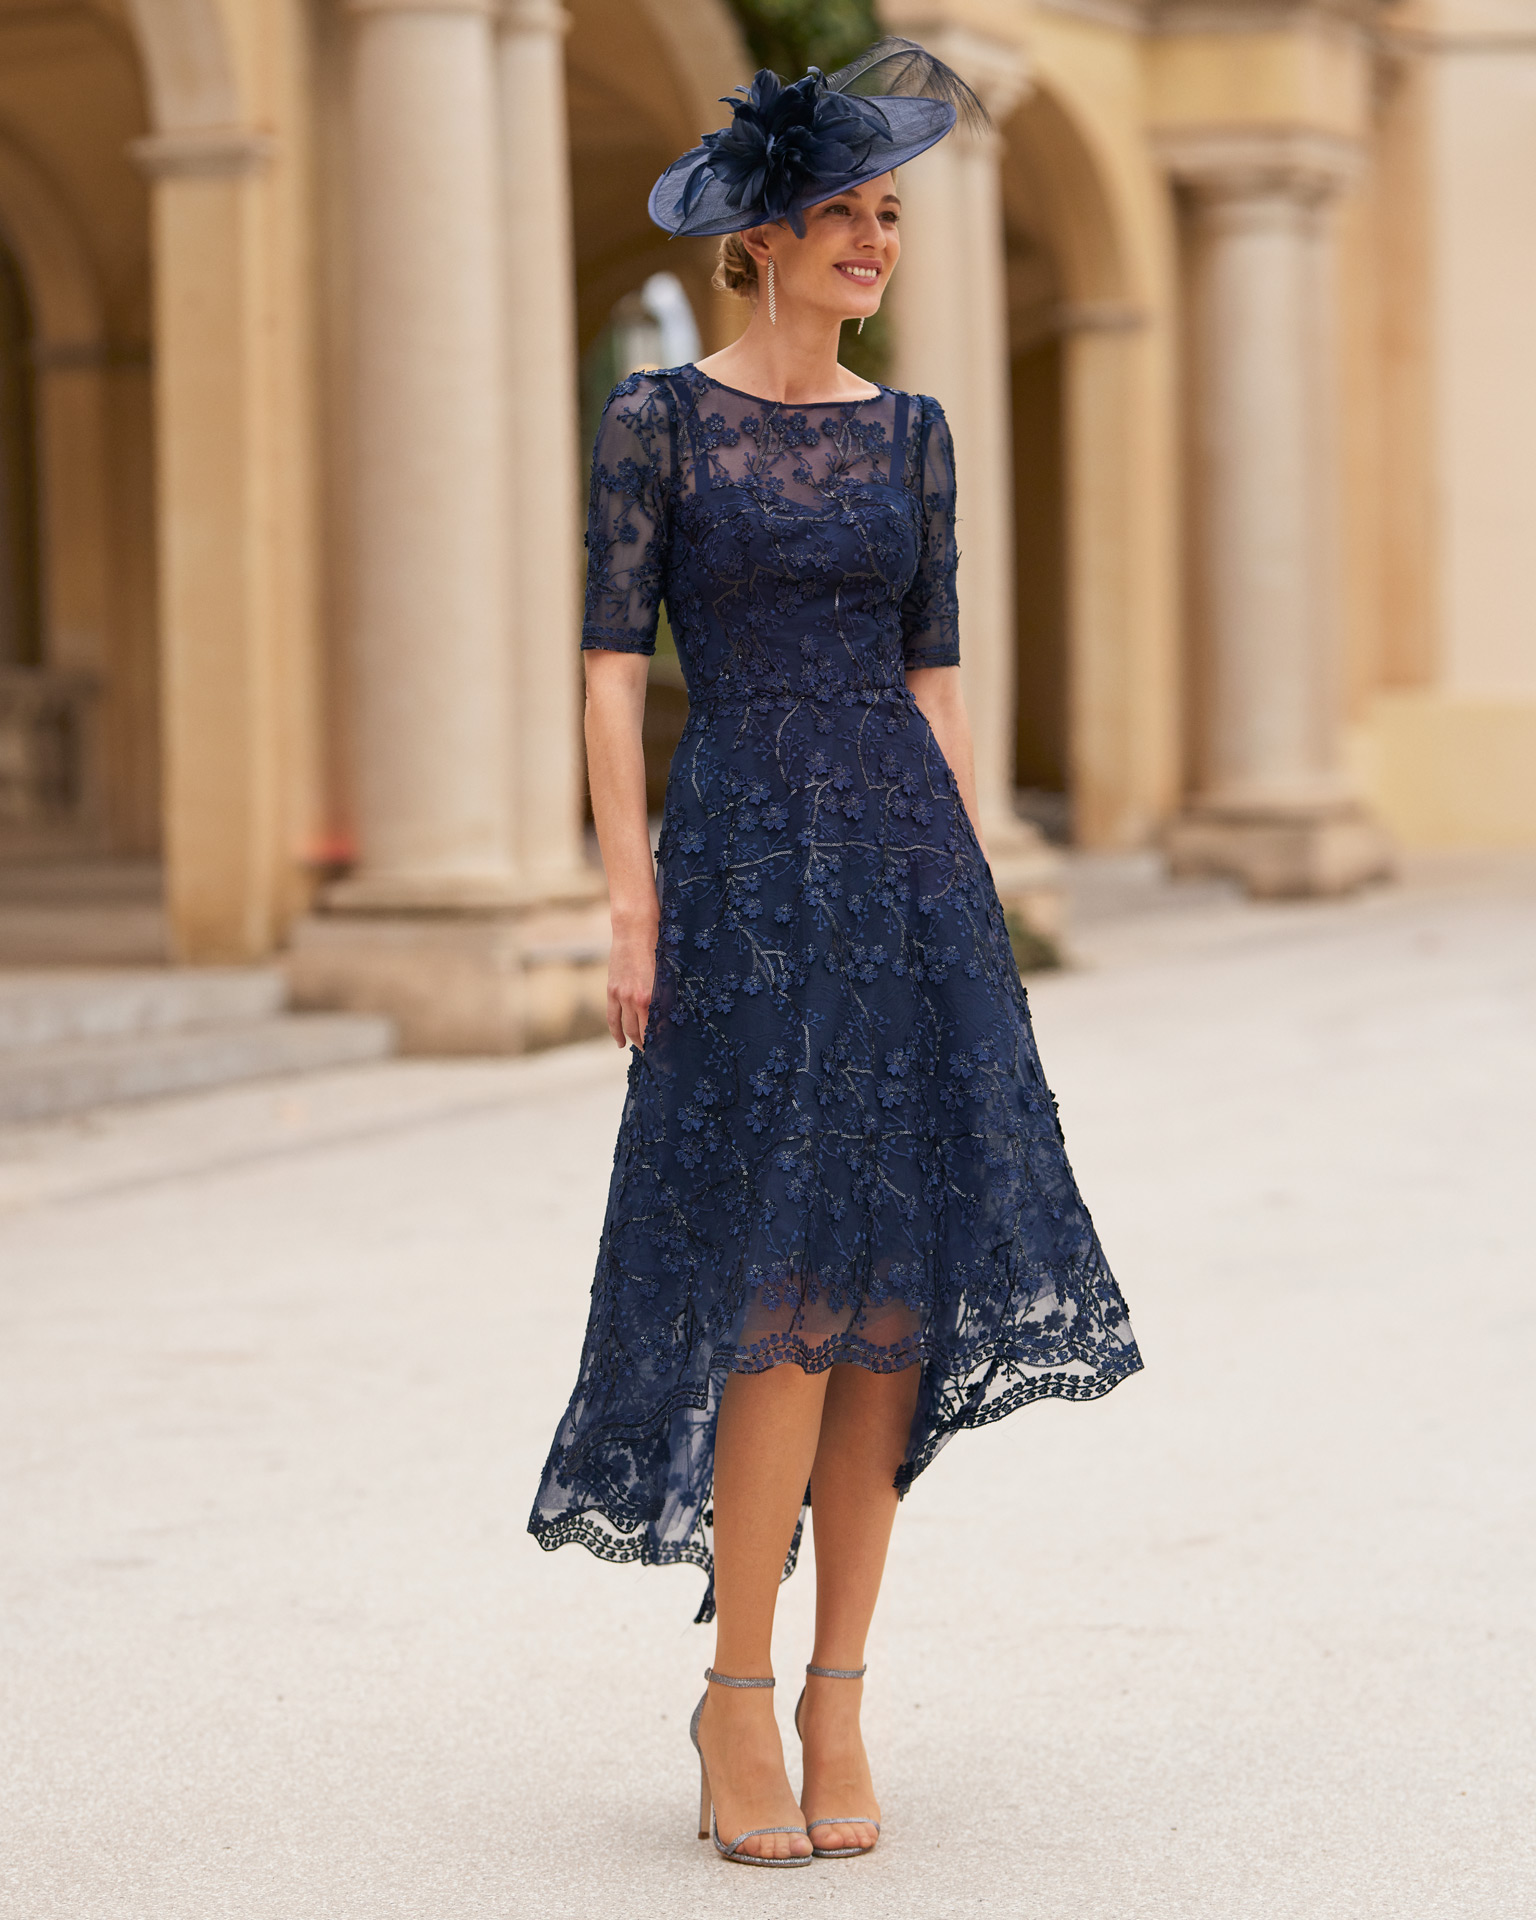 Elegant hi low evening dress. Crafted in lace beadwork. With bateau neckline and short sleeves. Couture Club look. MARFIL_BARCELONA.